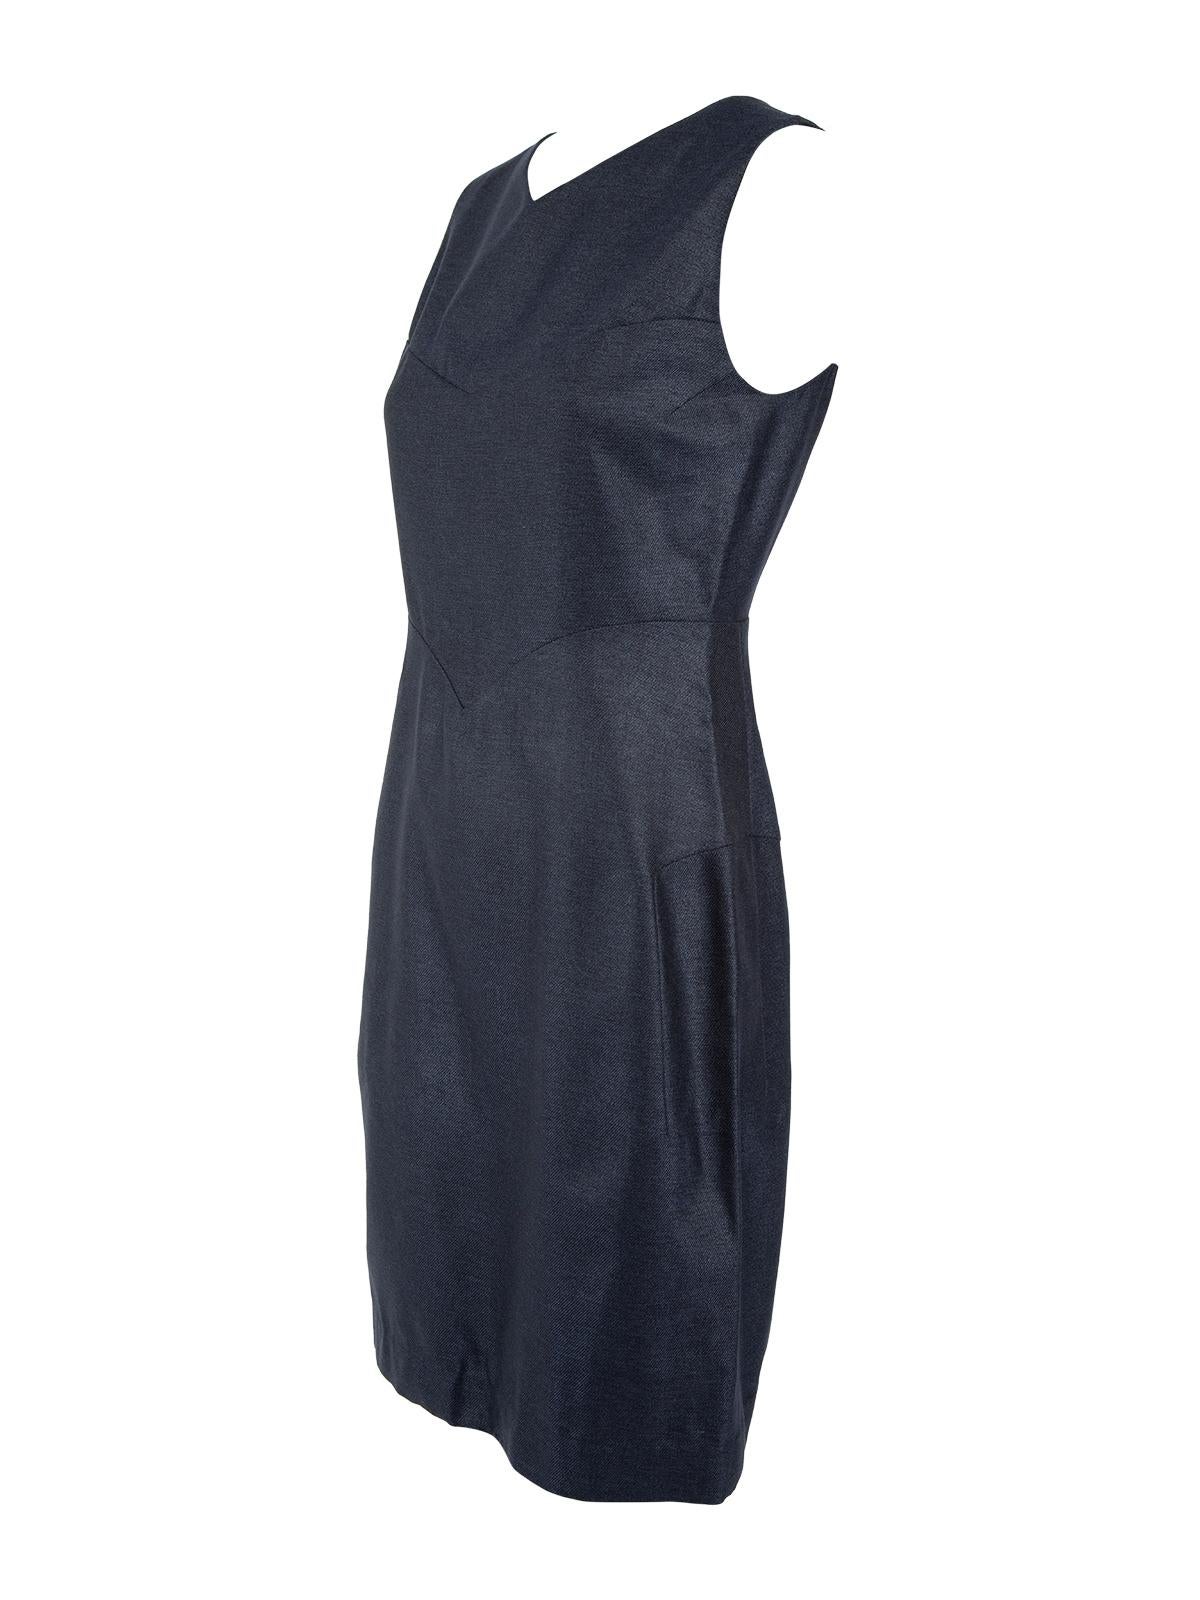 CONDITION is Very good. Hardly any visible wear to dress is evident on this used Jill Sander designer resale item.

Details
Navy
Denim style
Silk
Silk lining
Relaxed fit
Formal
Sleeveless
Round neck
Zip and clasp back fastening
Made in Italy